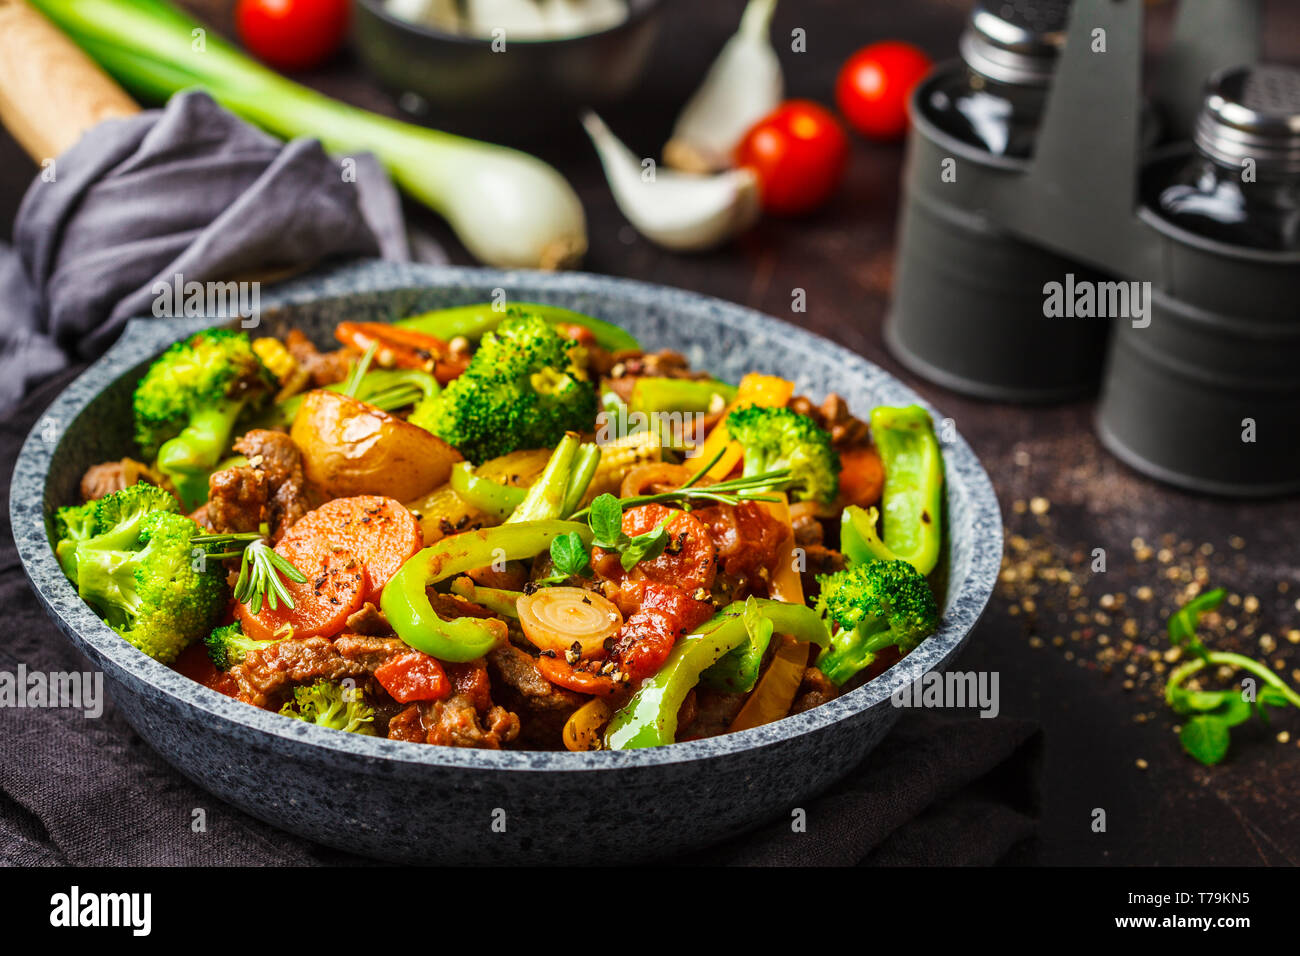 Fried beef stroganoff with potatoes, broccoli, corn, pepper, carrots and sauce in a pan, dark background. Stock Photo